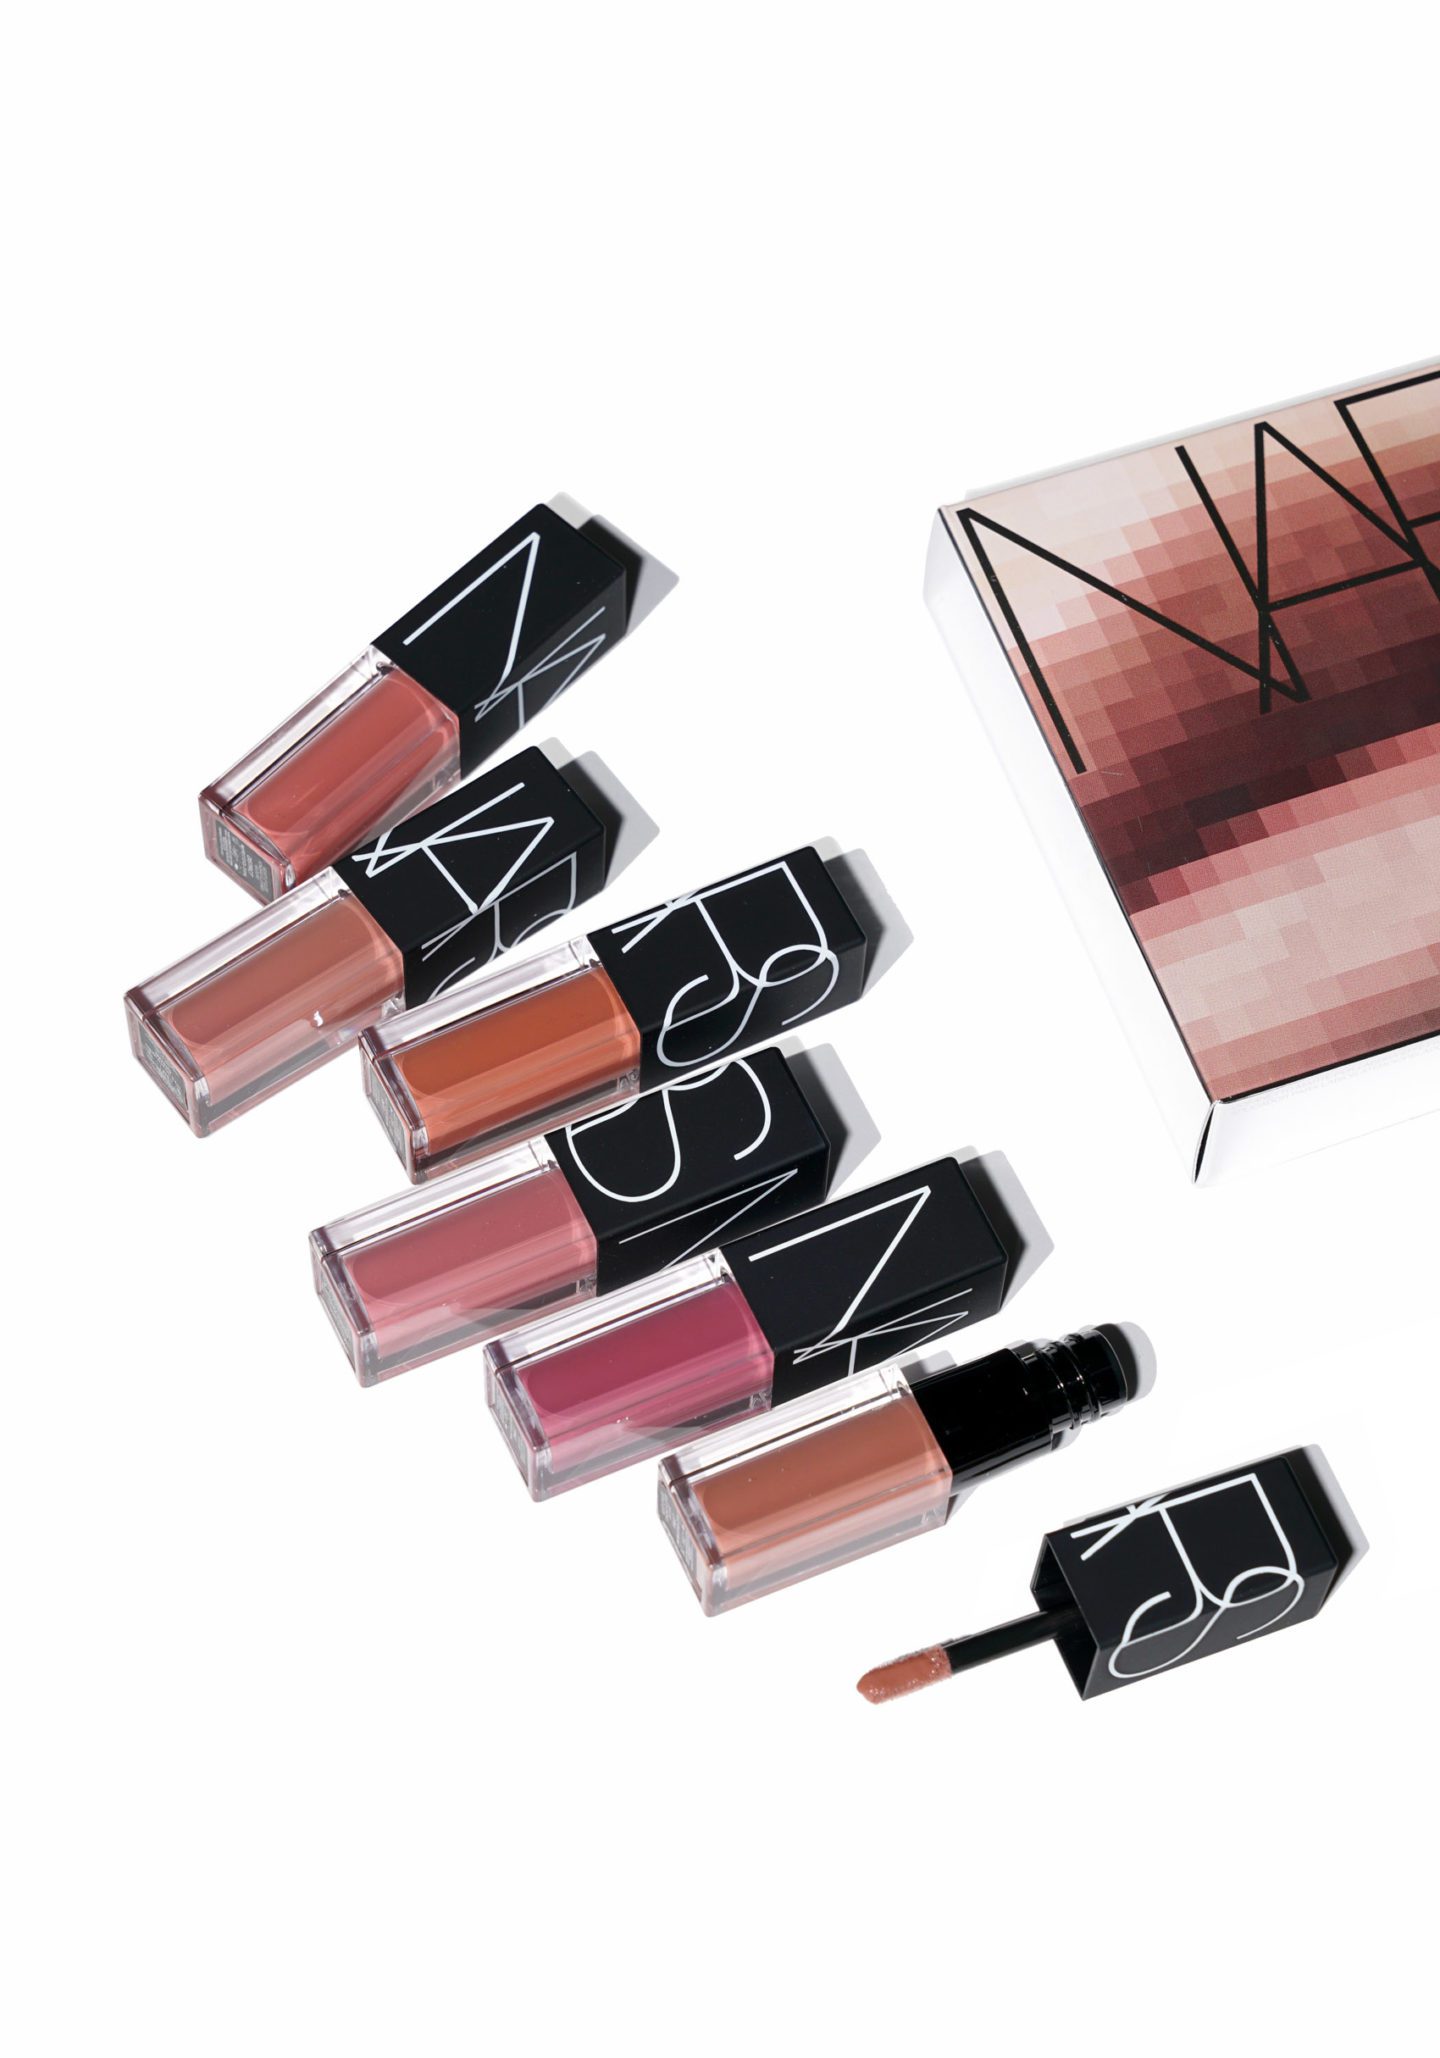 NARS NARSissist Ulta Wanted Velvet Lip Glide Set Review | The Beauty Look Book 